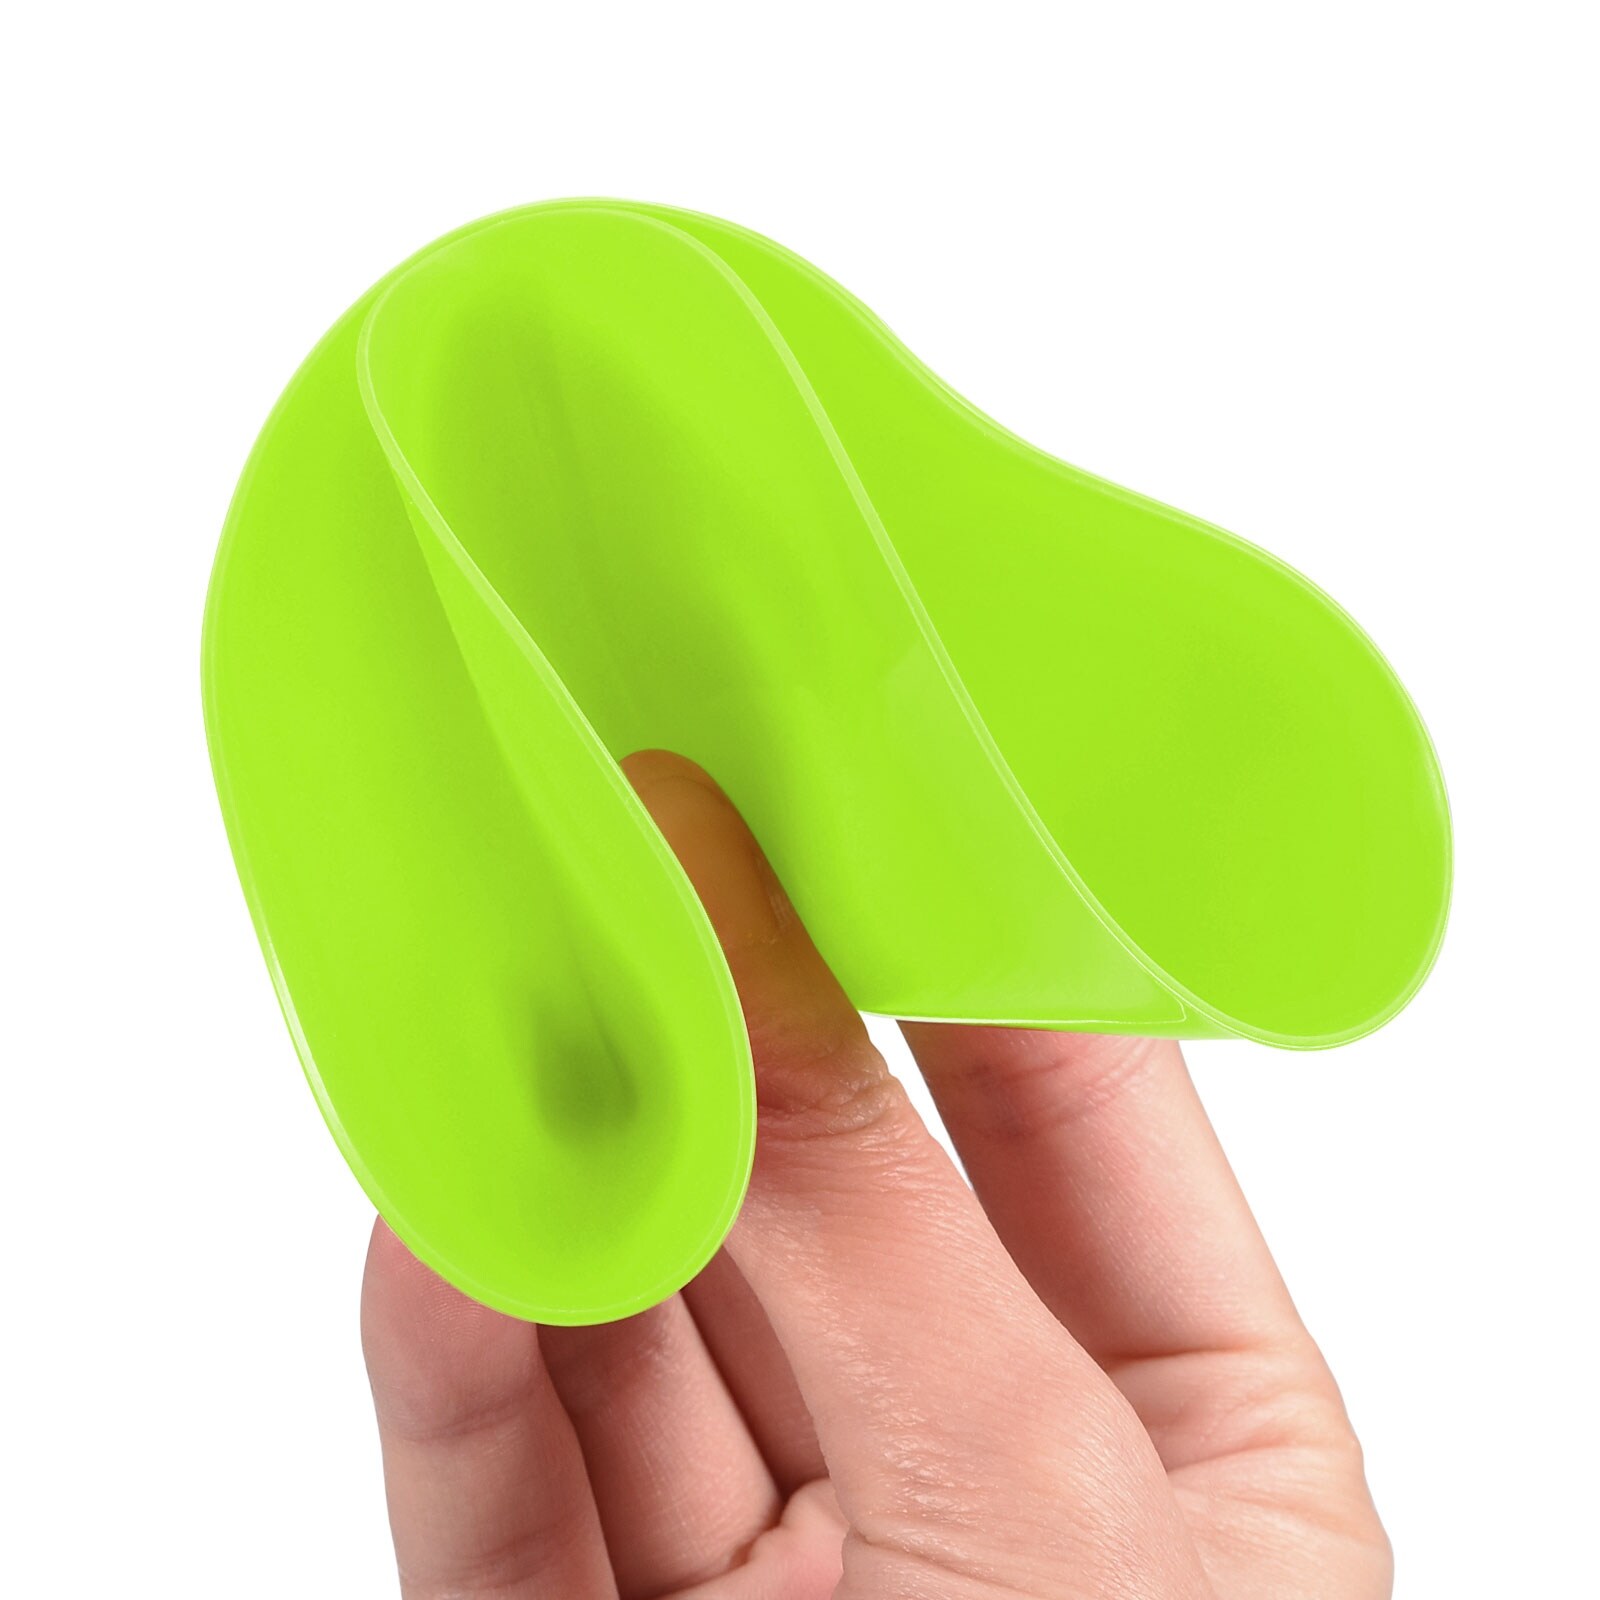 https://ak1.ostkcdn.com/images/products/is/images/direct/93b3b1b679e8ecd2558fac61fea9a7adc78916d3/4-pcs-Silicone-Jar-Opener-Gripper-Pad-Multi-Purpose-Bottle-Opener.jpg